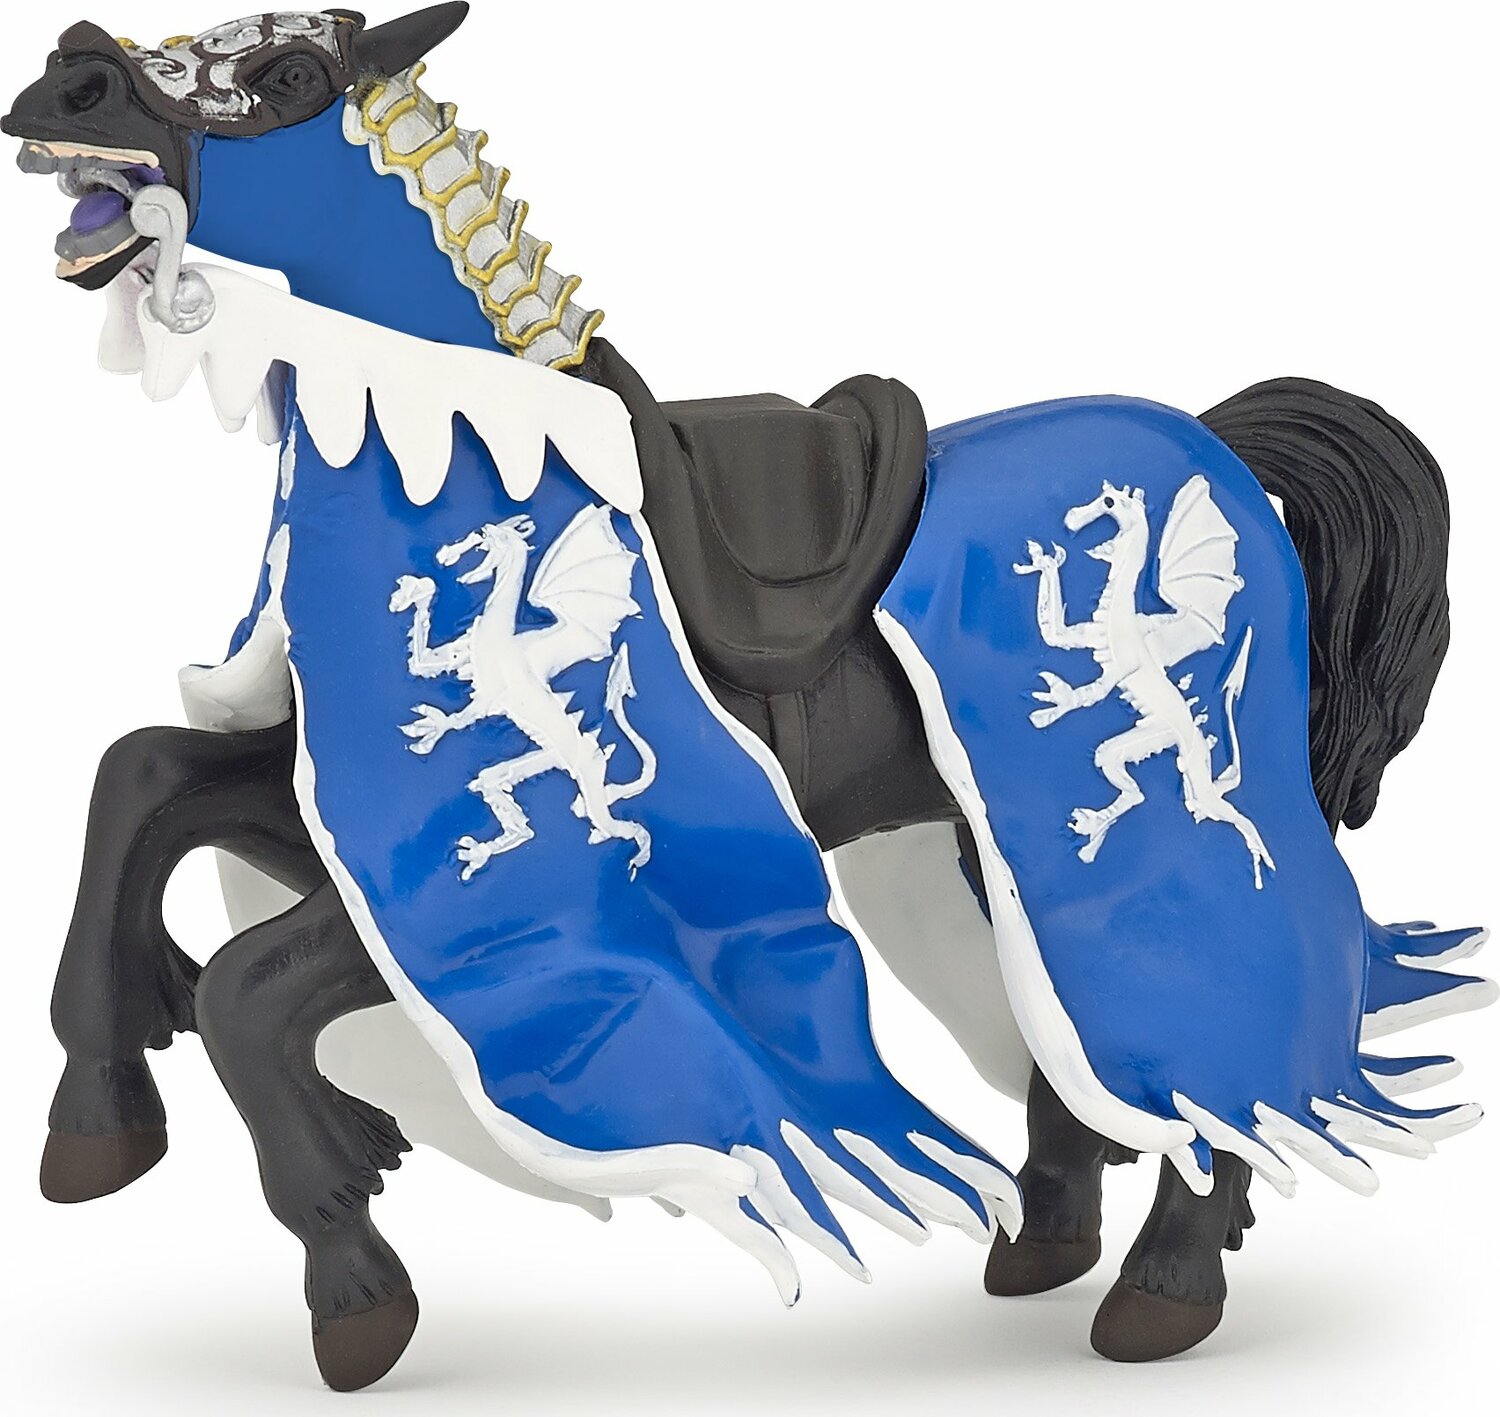 Papo 39389 Blue Dragon King Horse Figure for sale online 